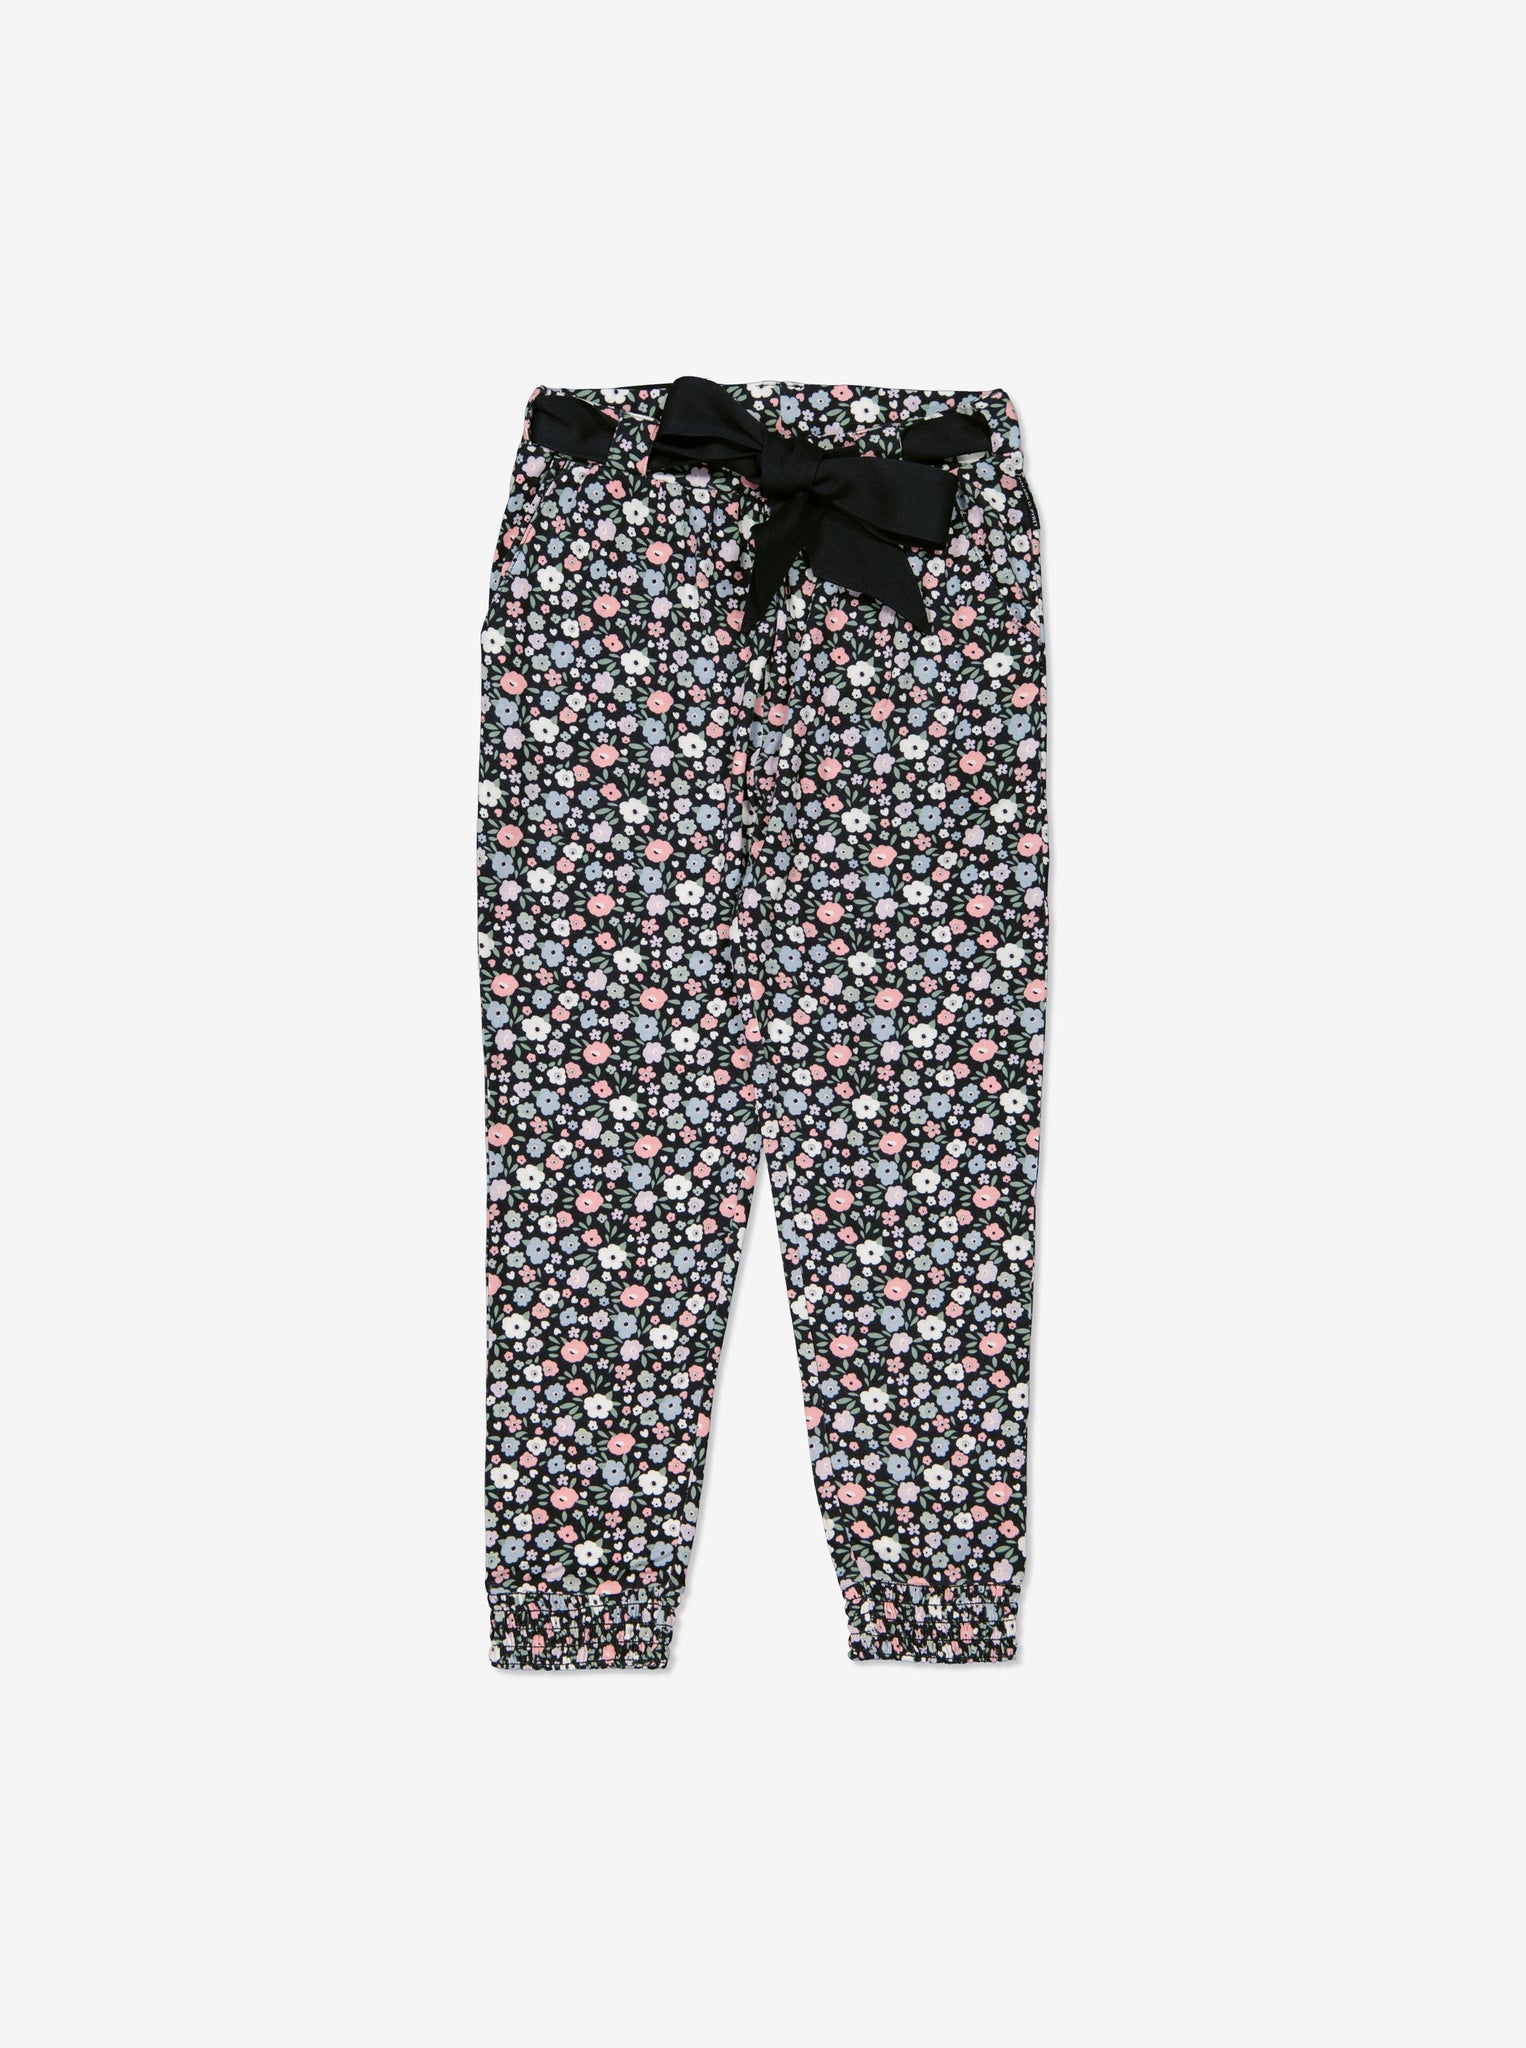  Floral Print Kids Joggers from Polarn O. Pyret Kidswear. Made using environmentally friendly materials.